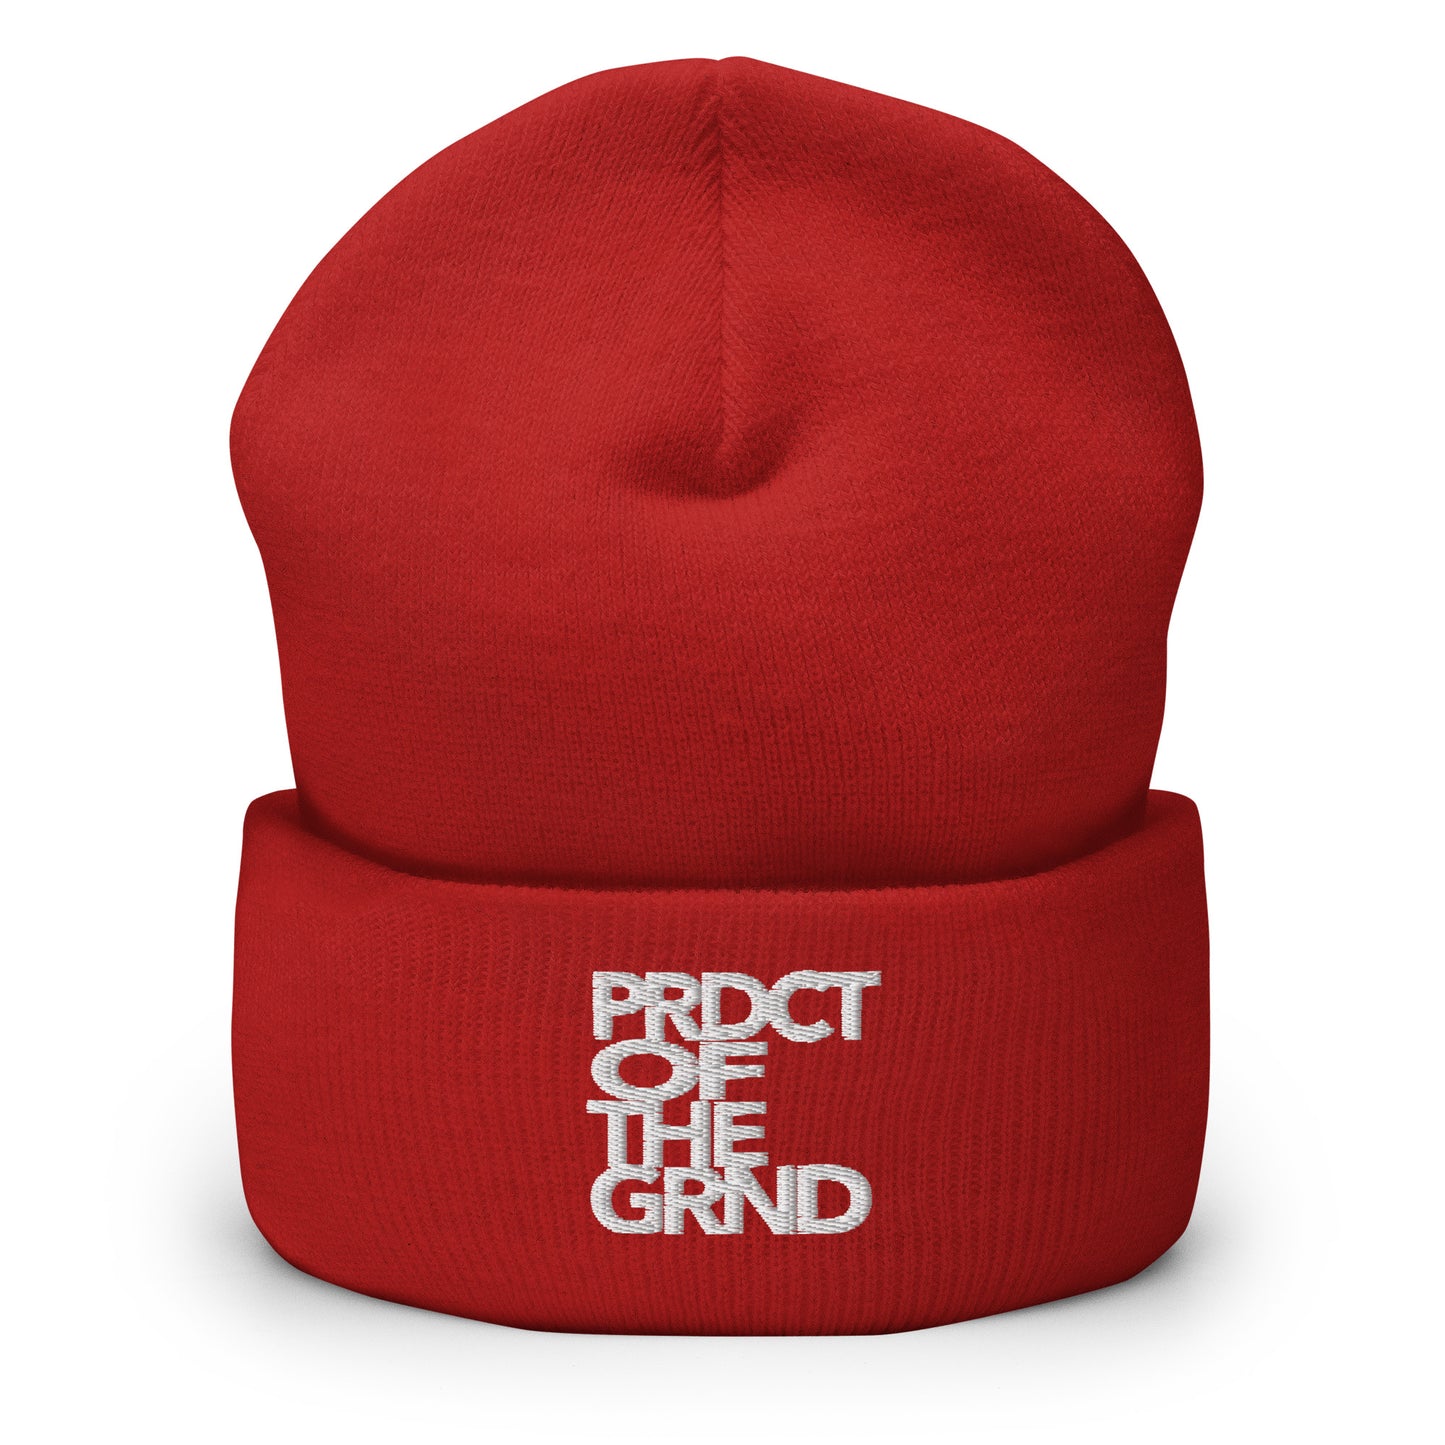 "Product of the Grind" Beanie